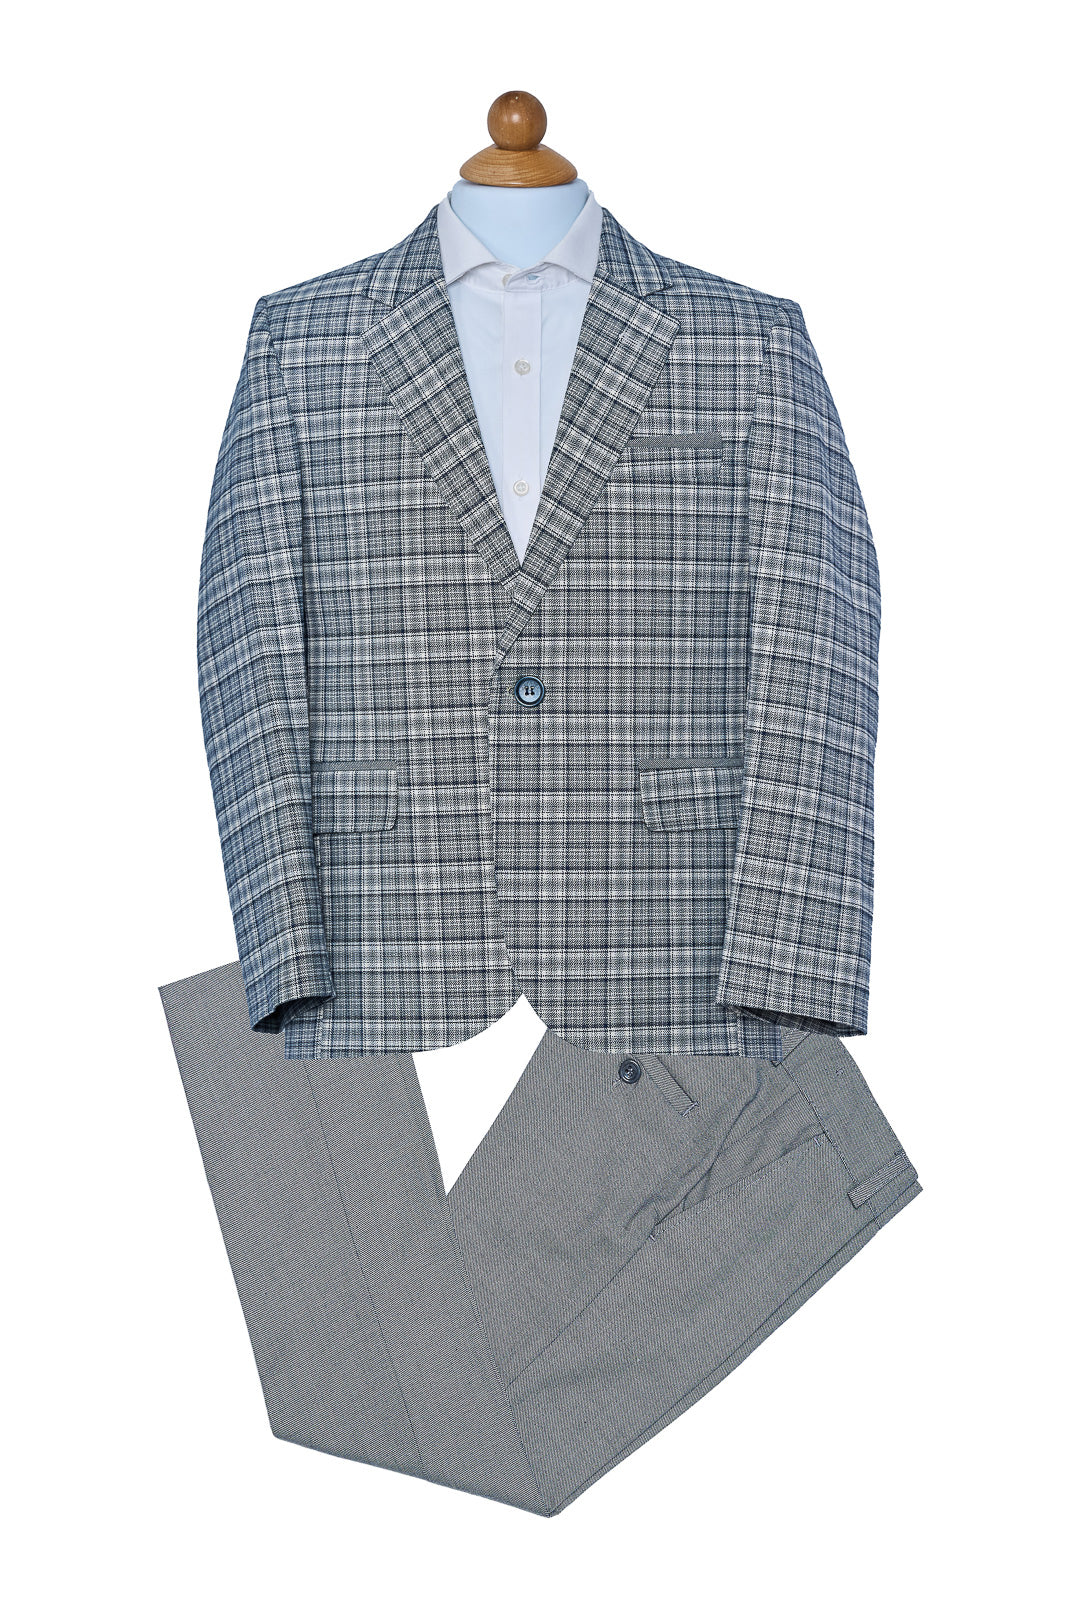 Light Gray & Navy Check Suit